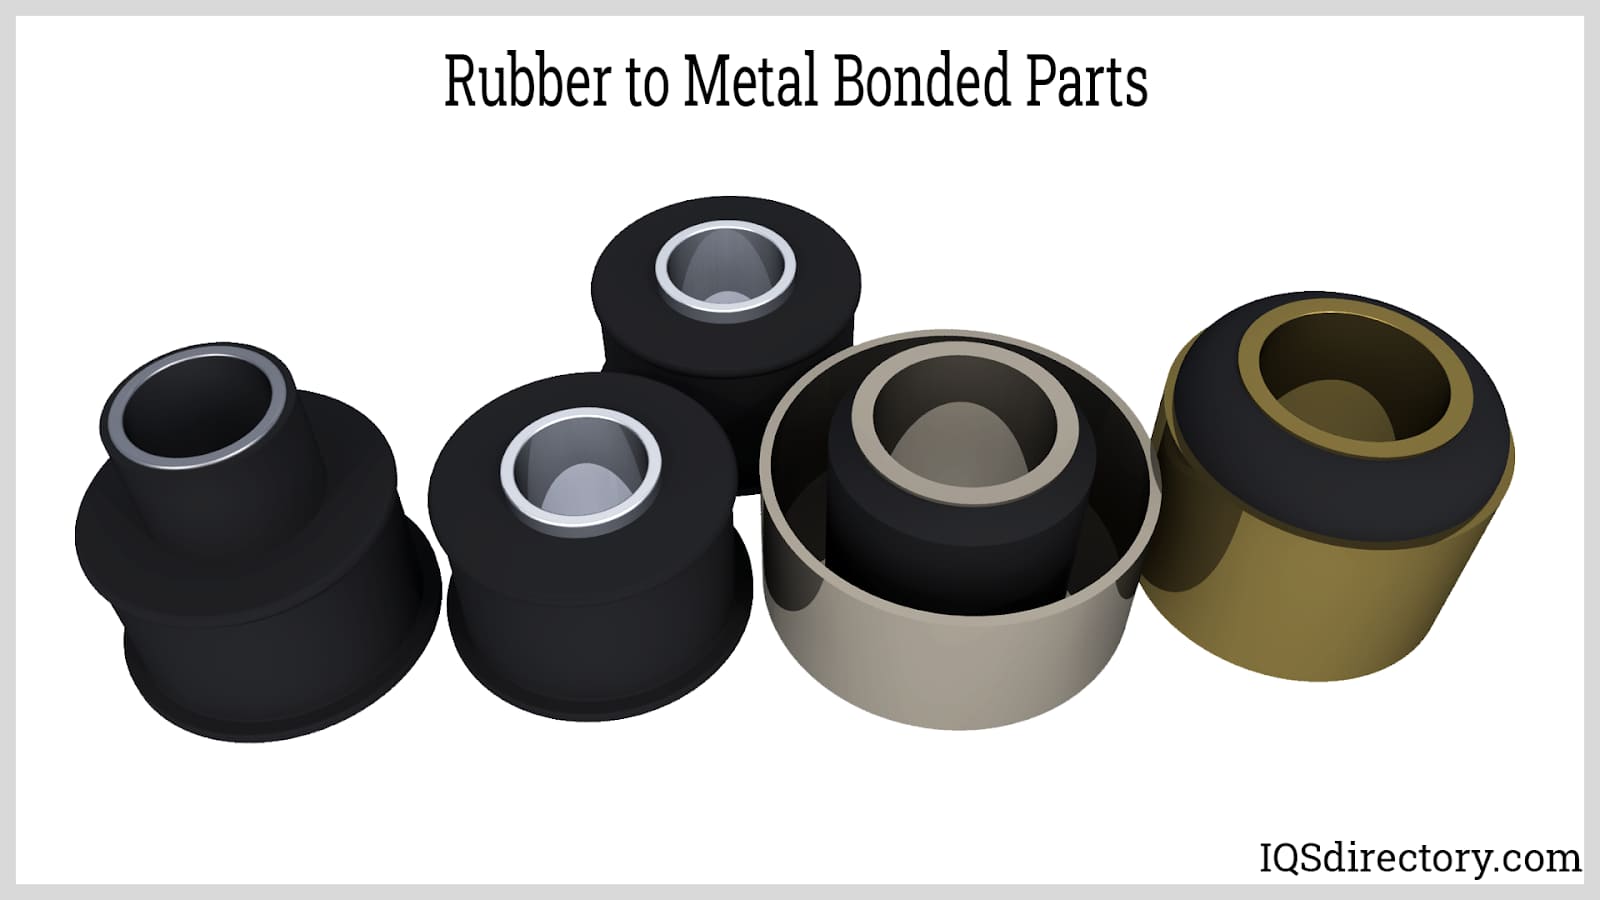 What Is the Best Adhesive for Rubber to Metal?